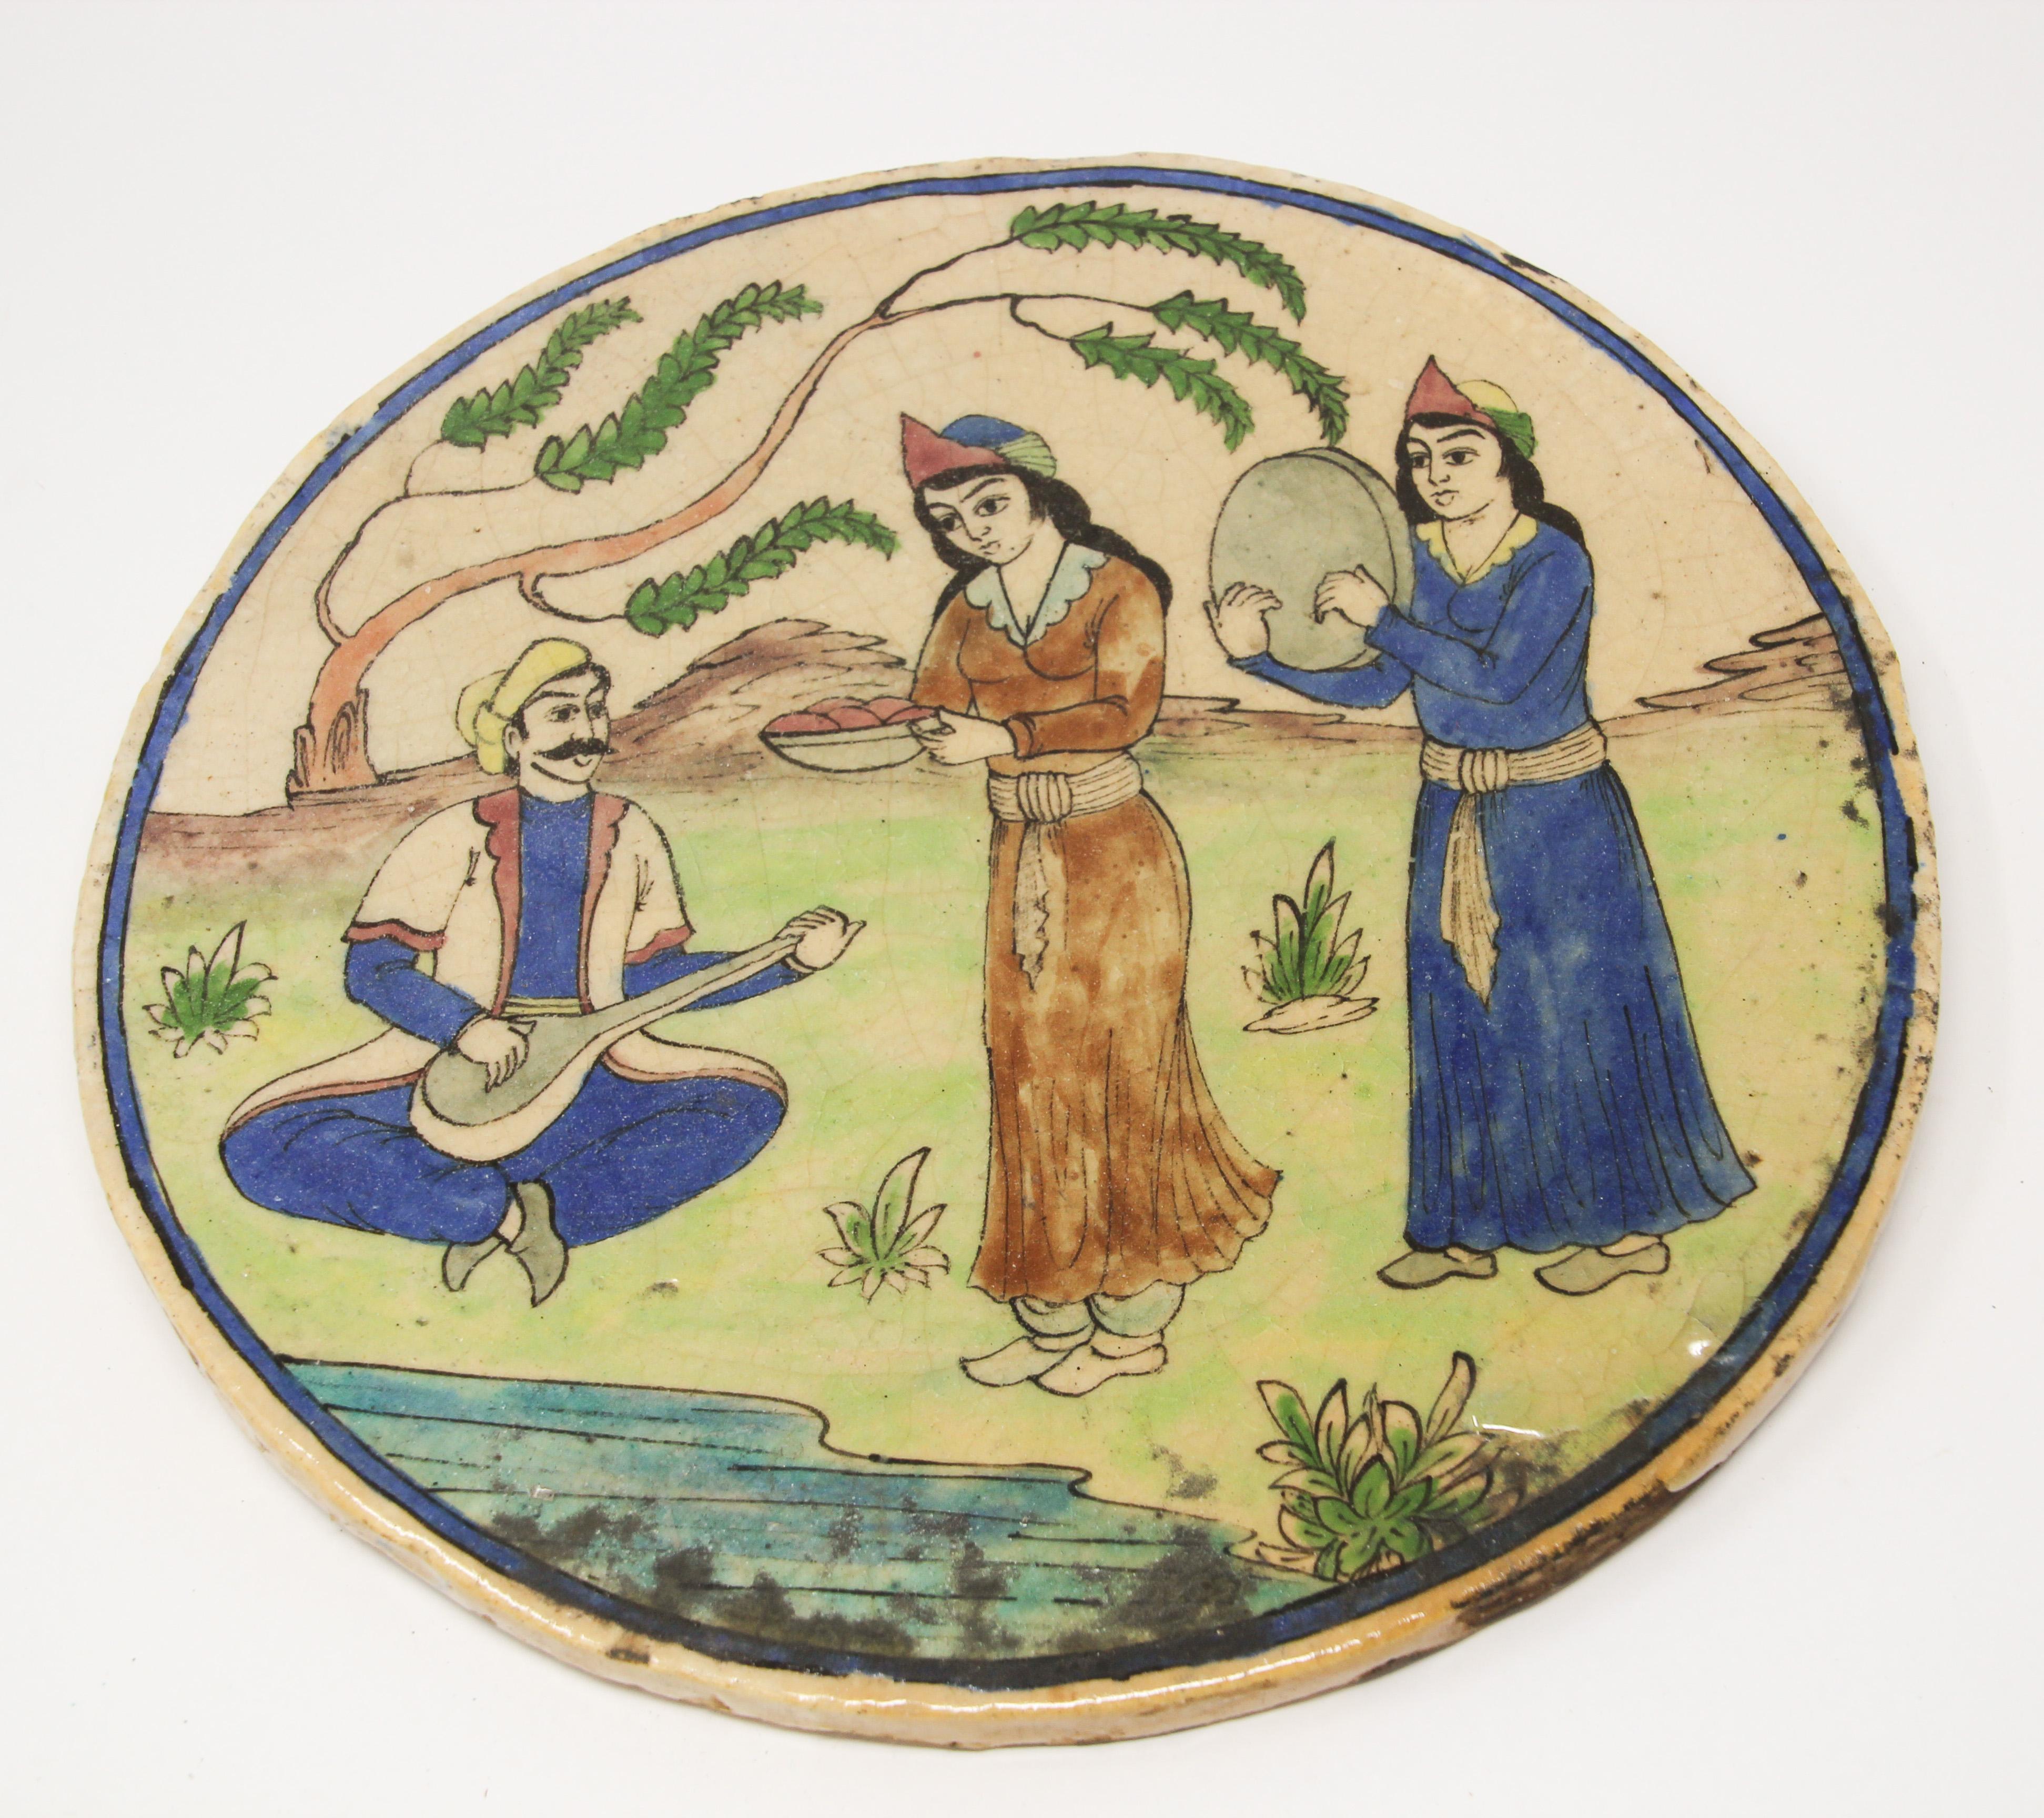 Antique Qajar Middle Eastern Islamic tile plaque.
Moorish glazed ceramic tile depicting an outdoor scene with musician and women serving food and dancing.
Beautiful Moorish Turkish handcrafted decorative circular crackle hand painted and glazed